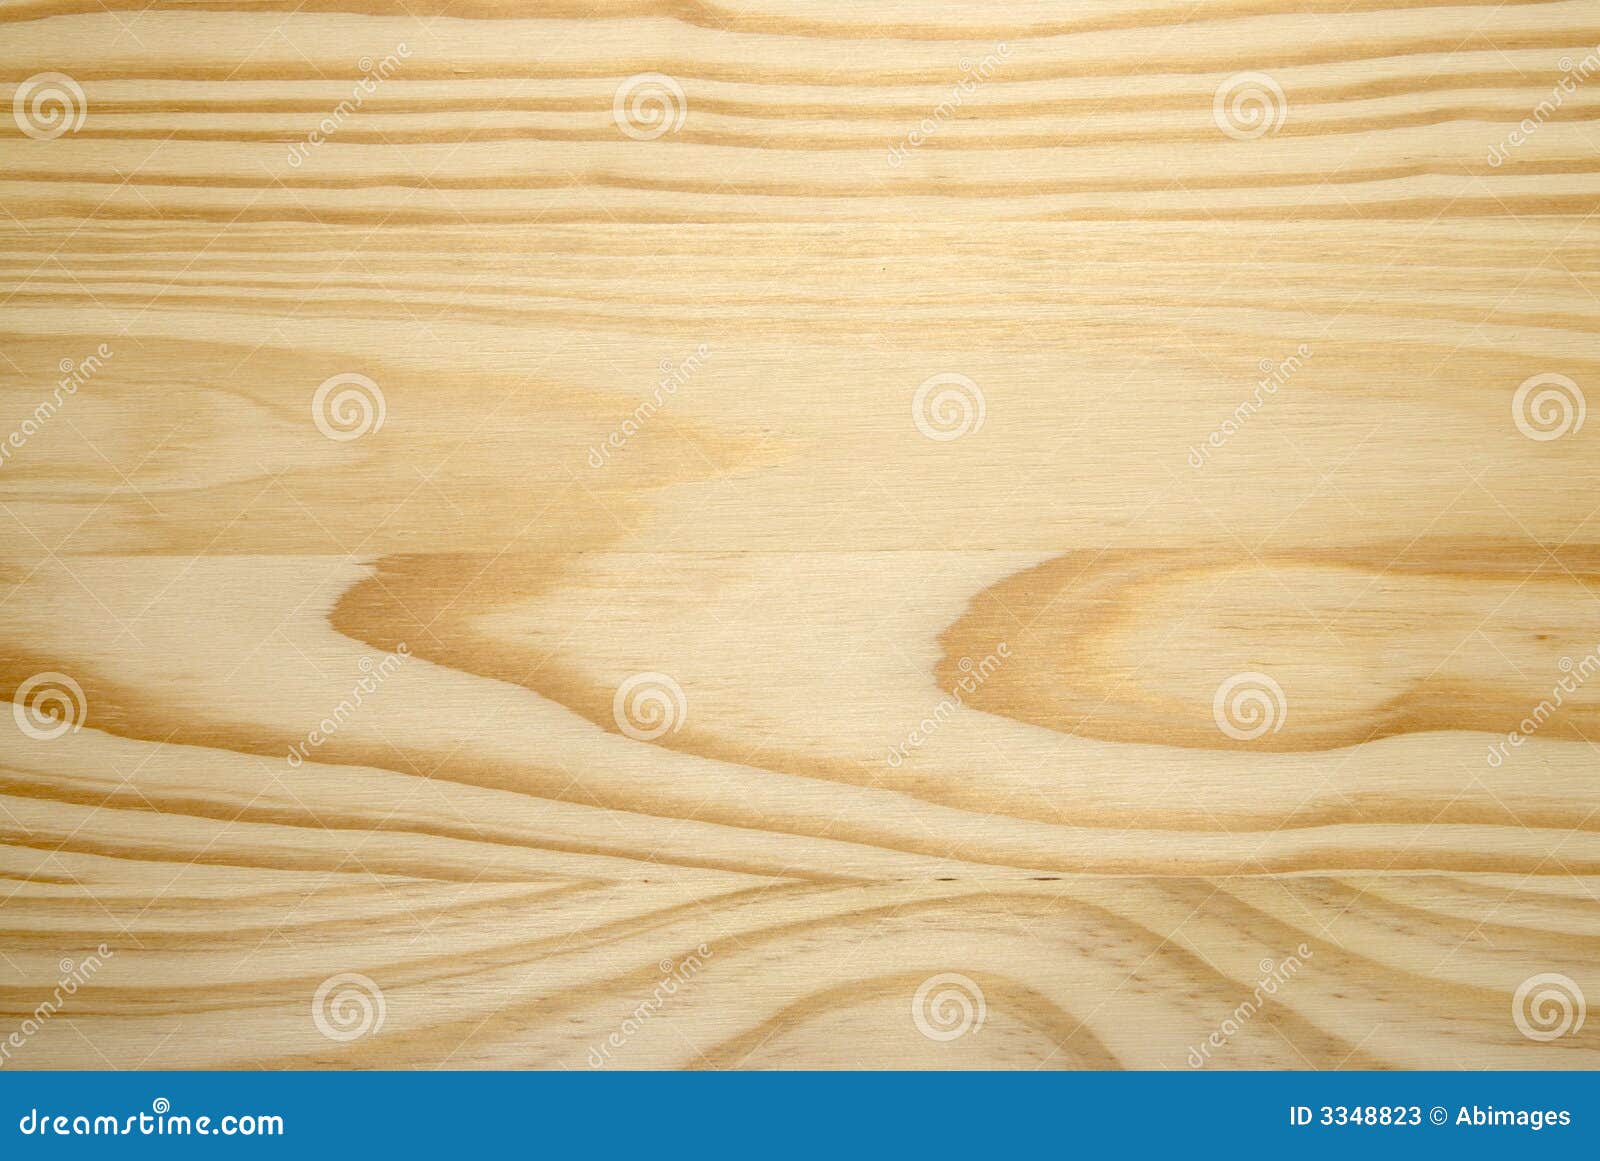 librarian Commerce sadness Wood grain texture stock image. Image of pine, plain, wooden - 3348823